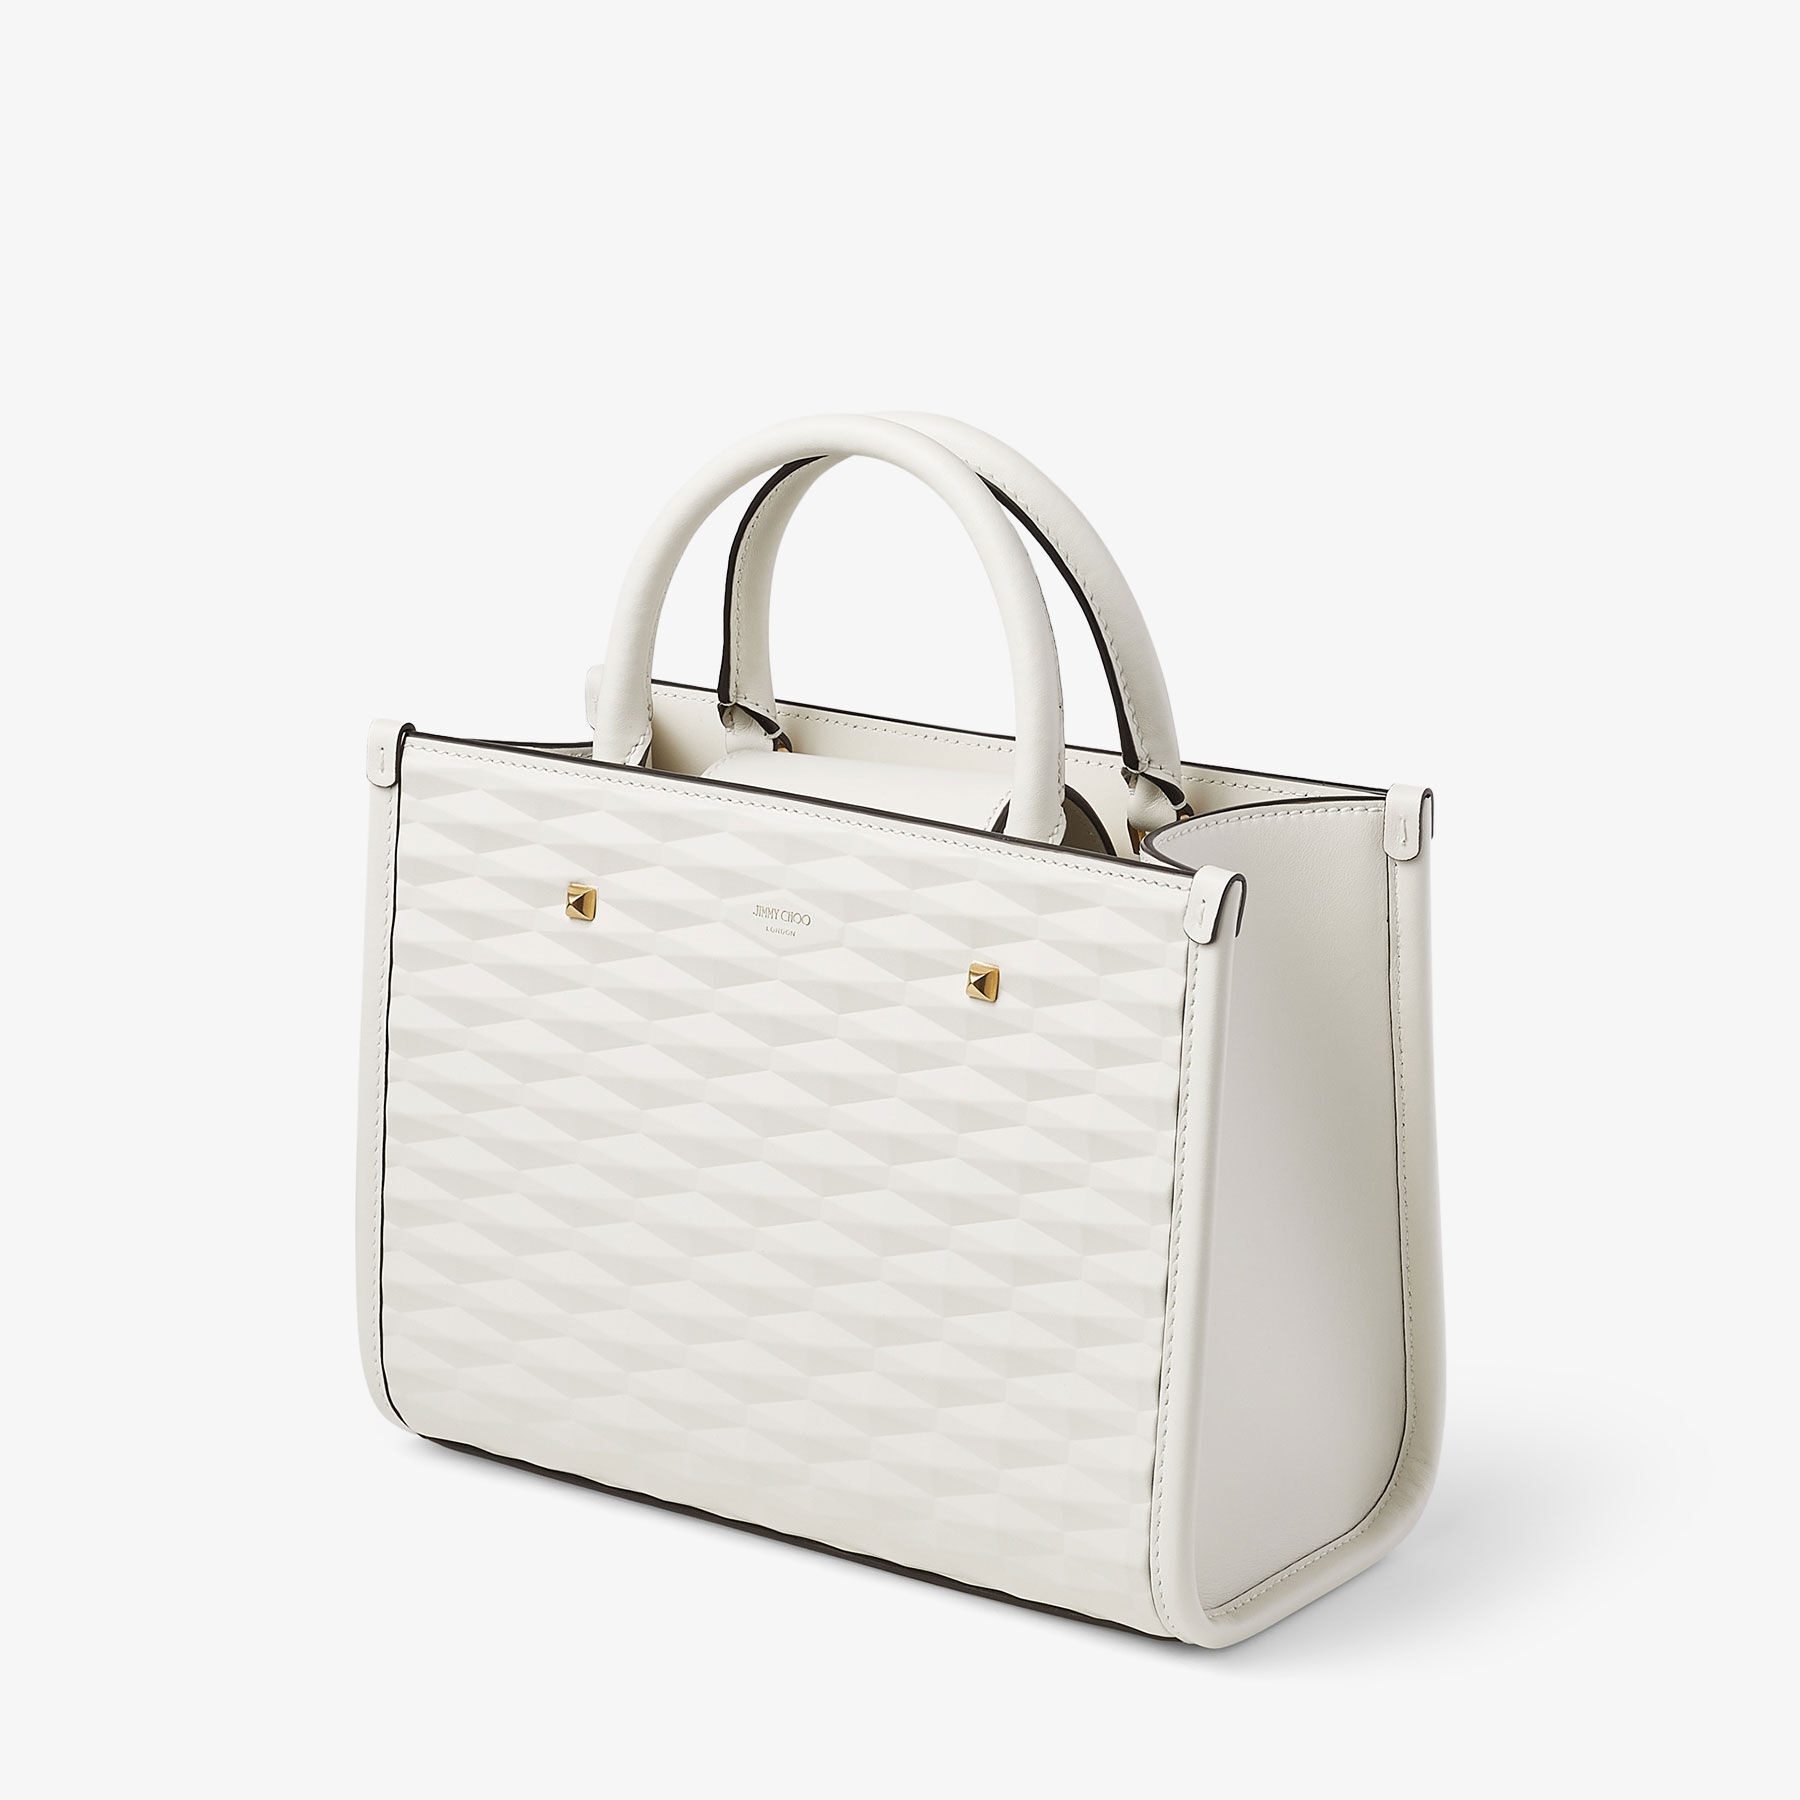 Avenue S Tote
White Diamond Embossed 3D Leather Tote Bag - 3